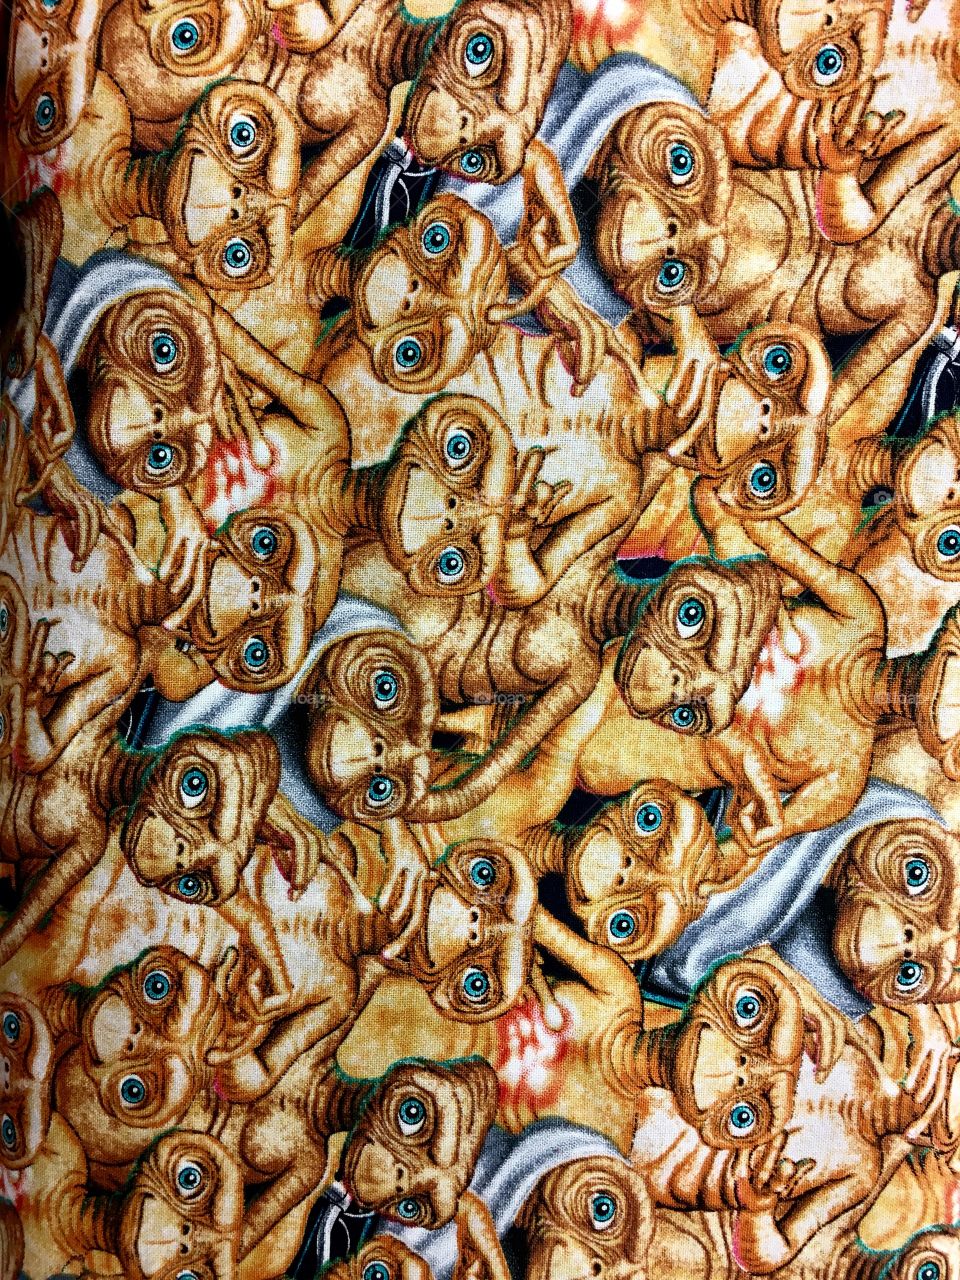 Repeating E.T. Print on fabric 